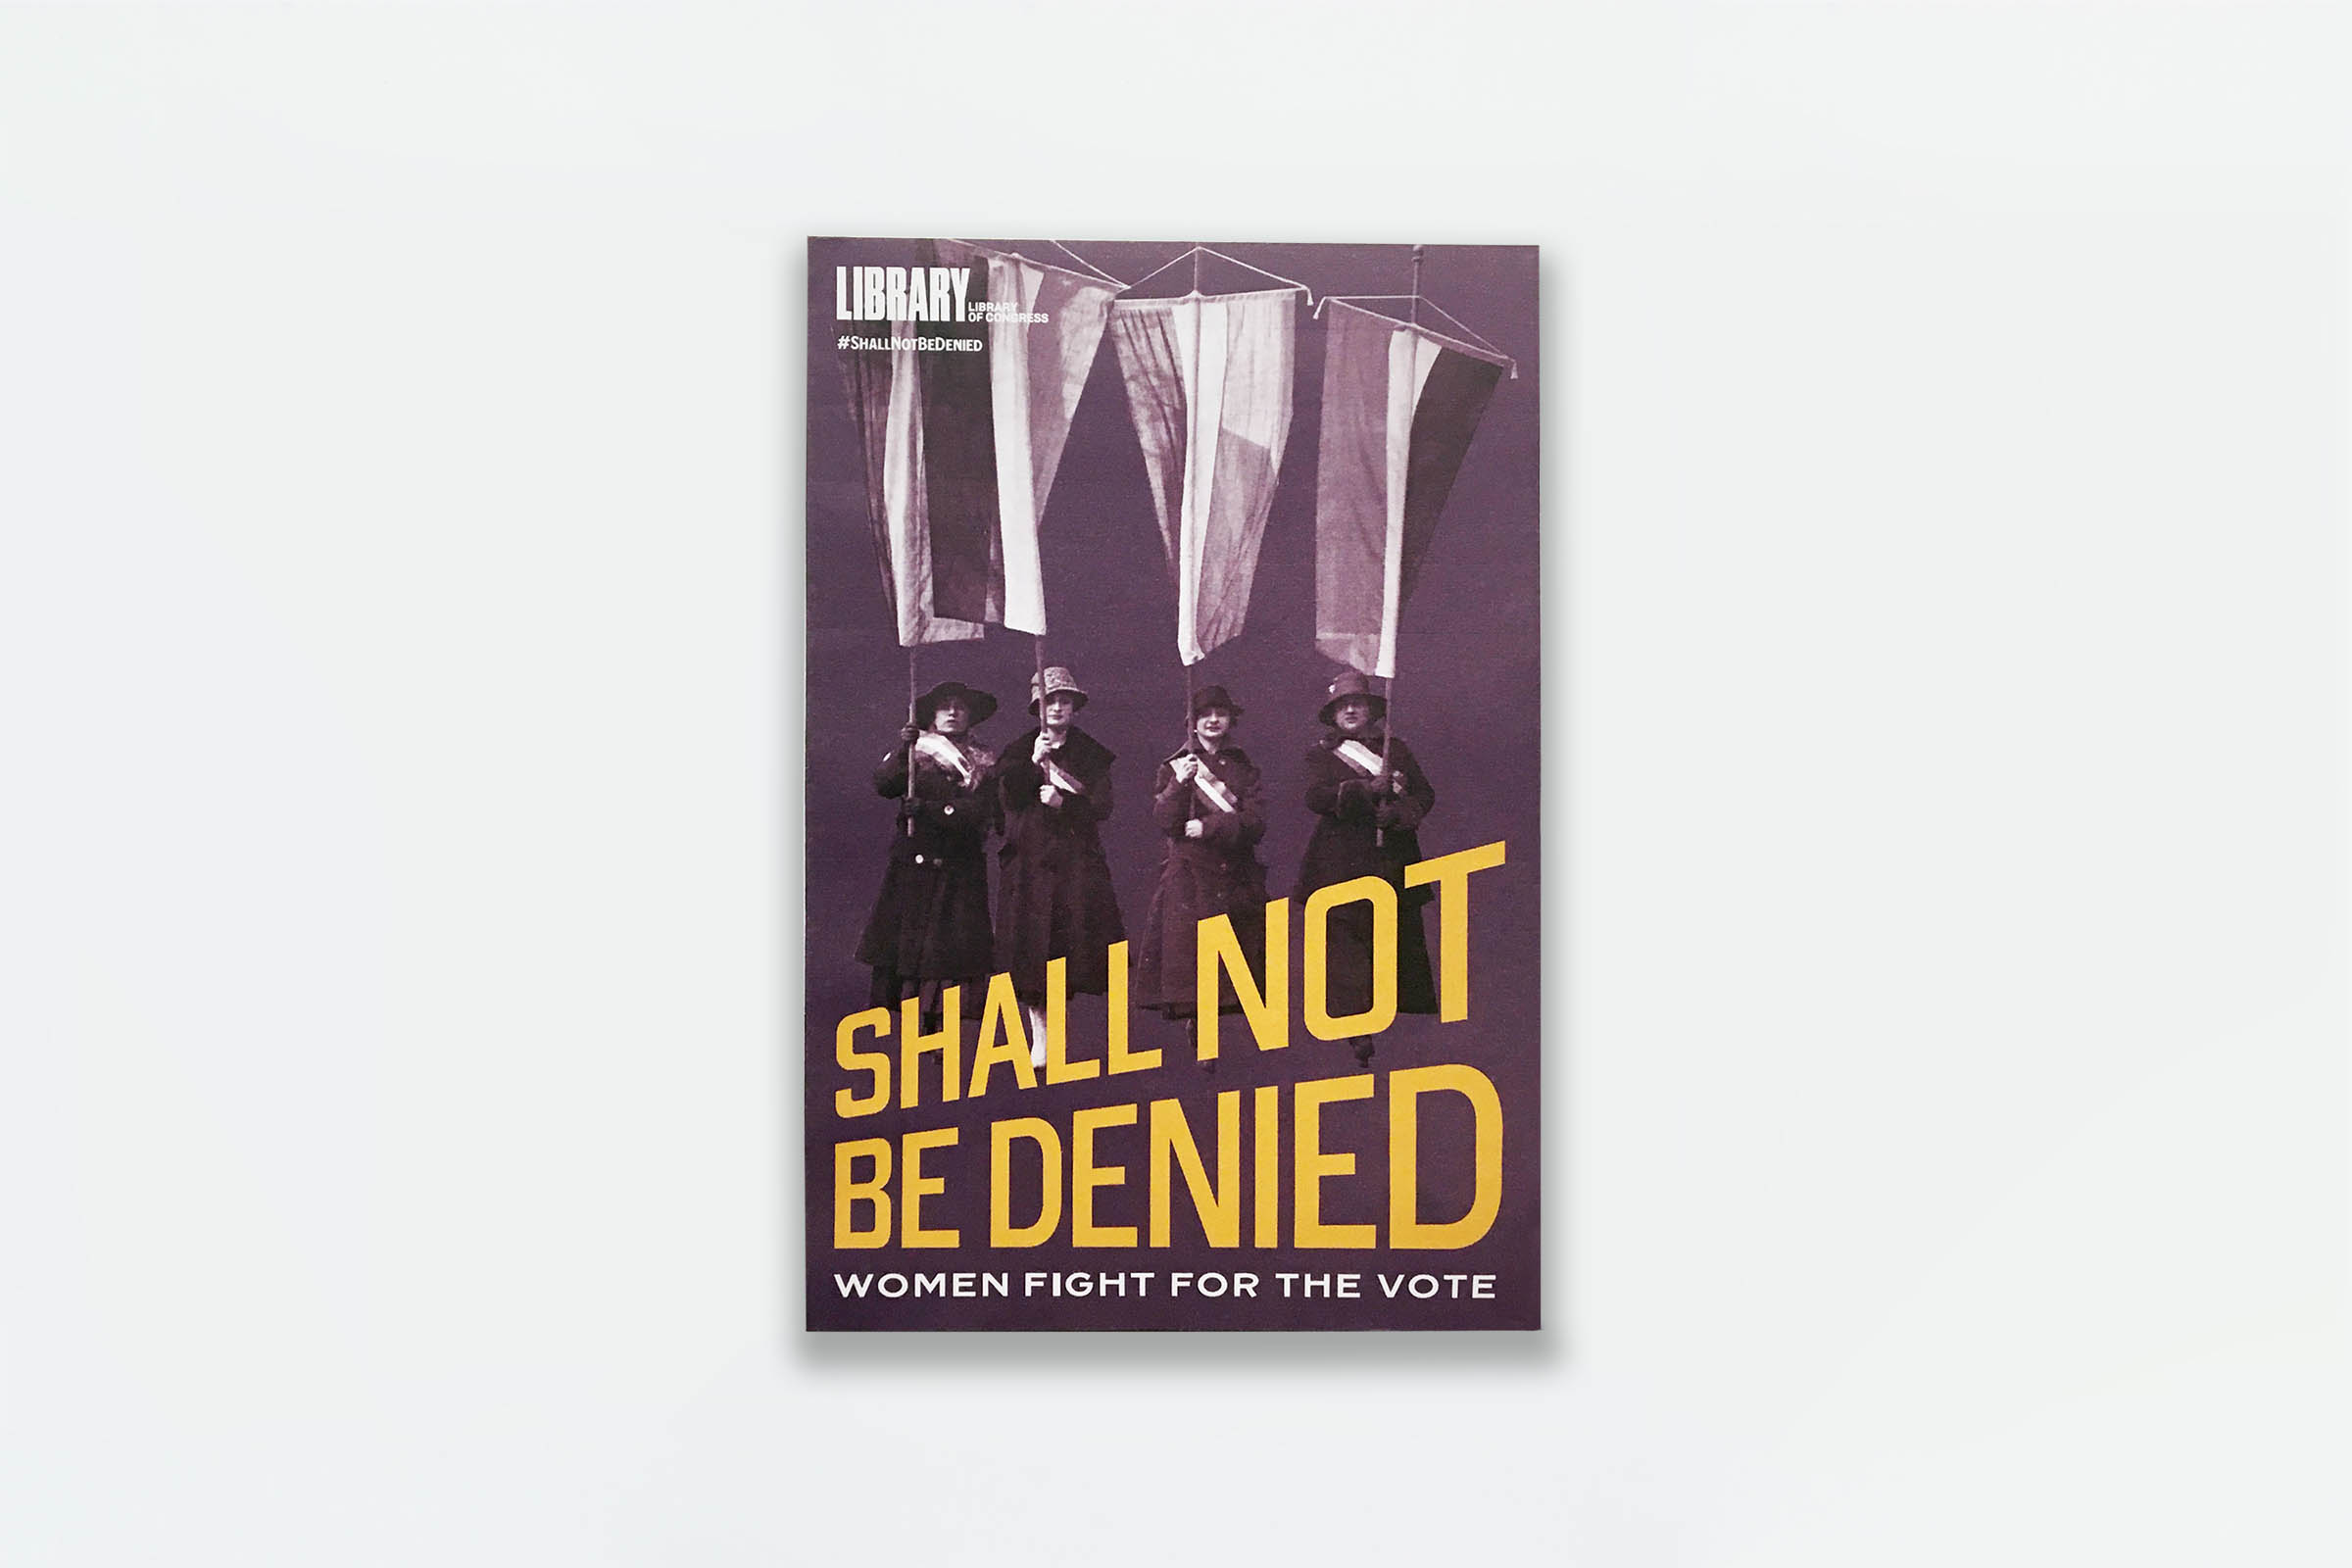 Shall Not Be Denied Brochure. P+A designed the Shall Not Be Denied exhibition brochure. It folds out to show a reproduction of Henry Mayer’s illustration The Awakening; a timeline of “States and Territories Extending Full Suffrage to Women” prior to the Nineteenth Amendment; and a condensed version of the exhibition’s “More to the Movement” section.